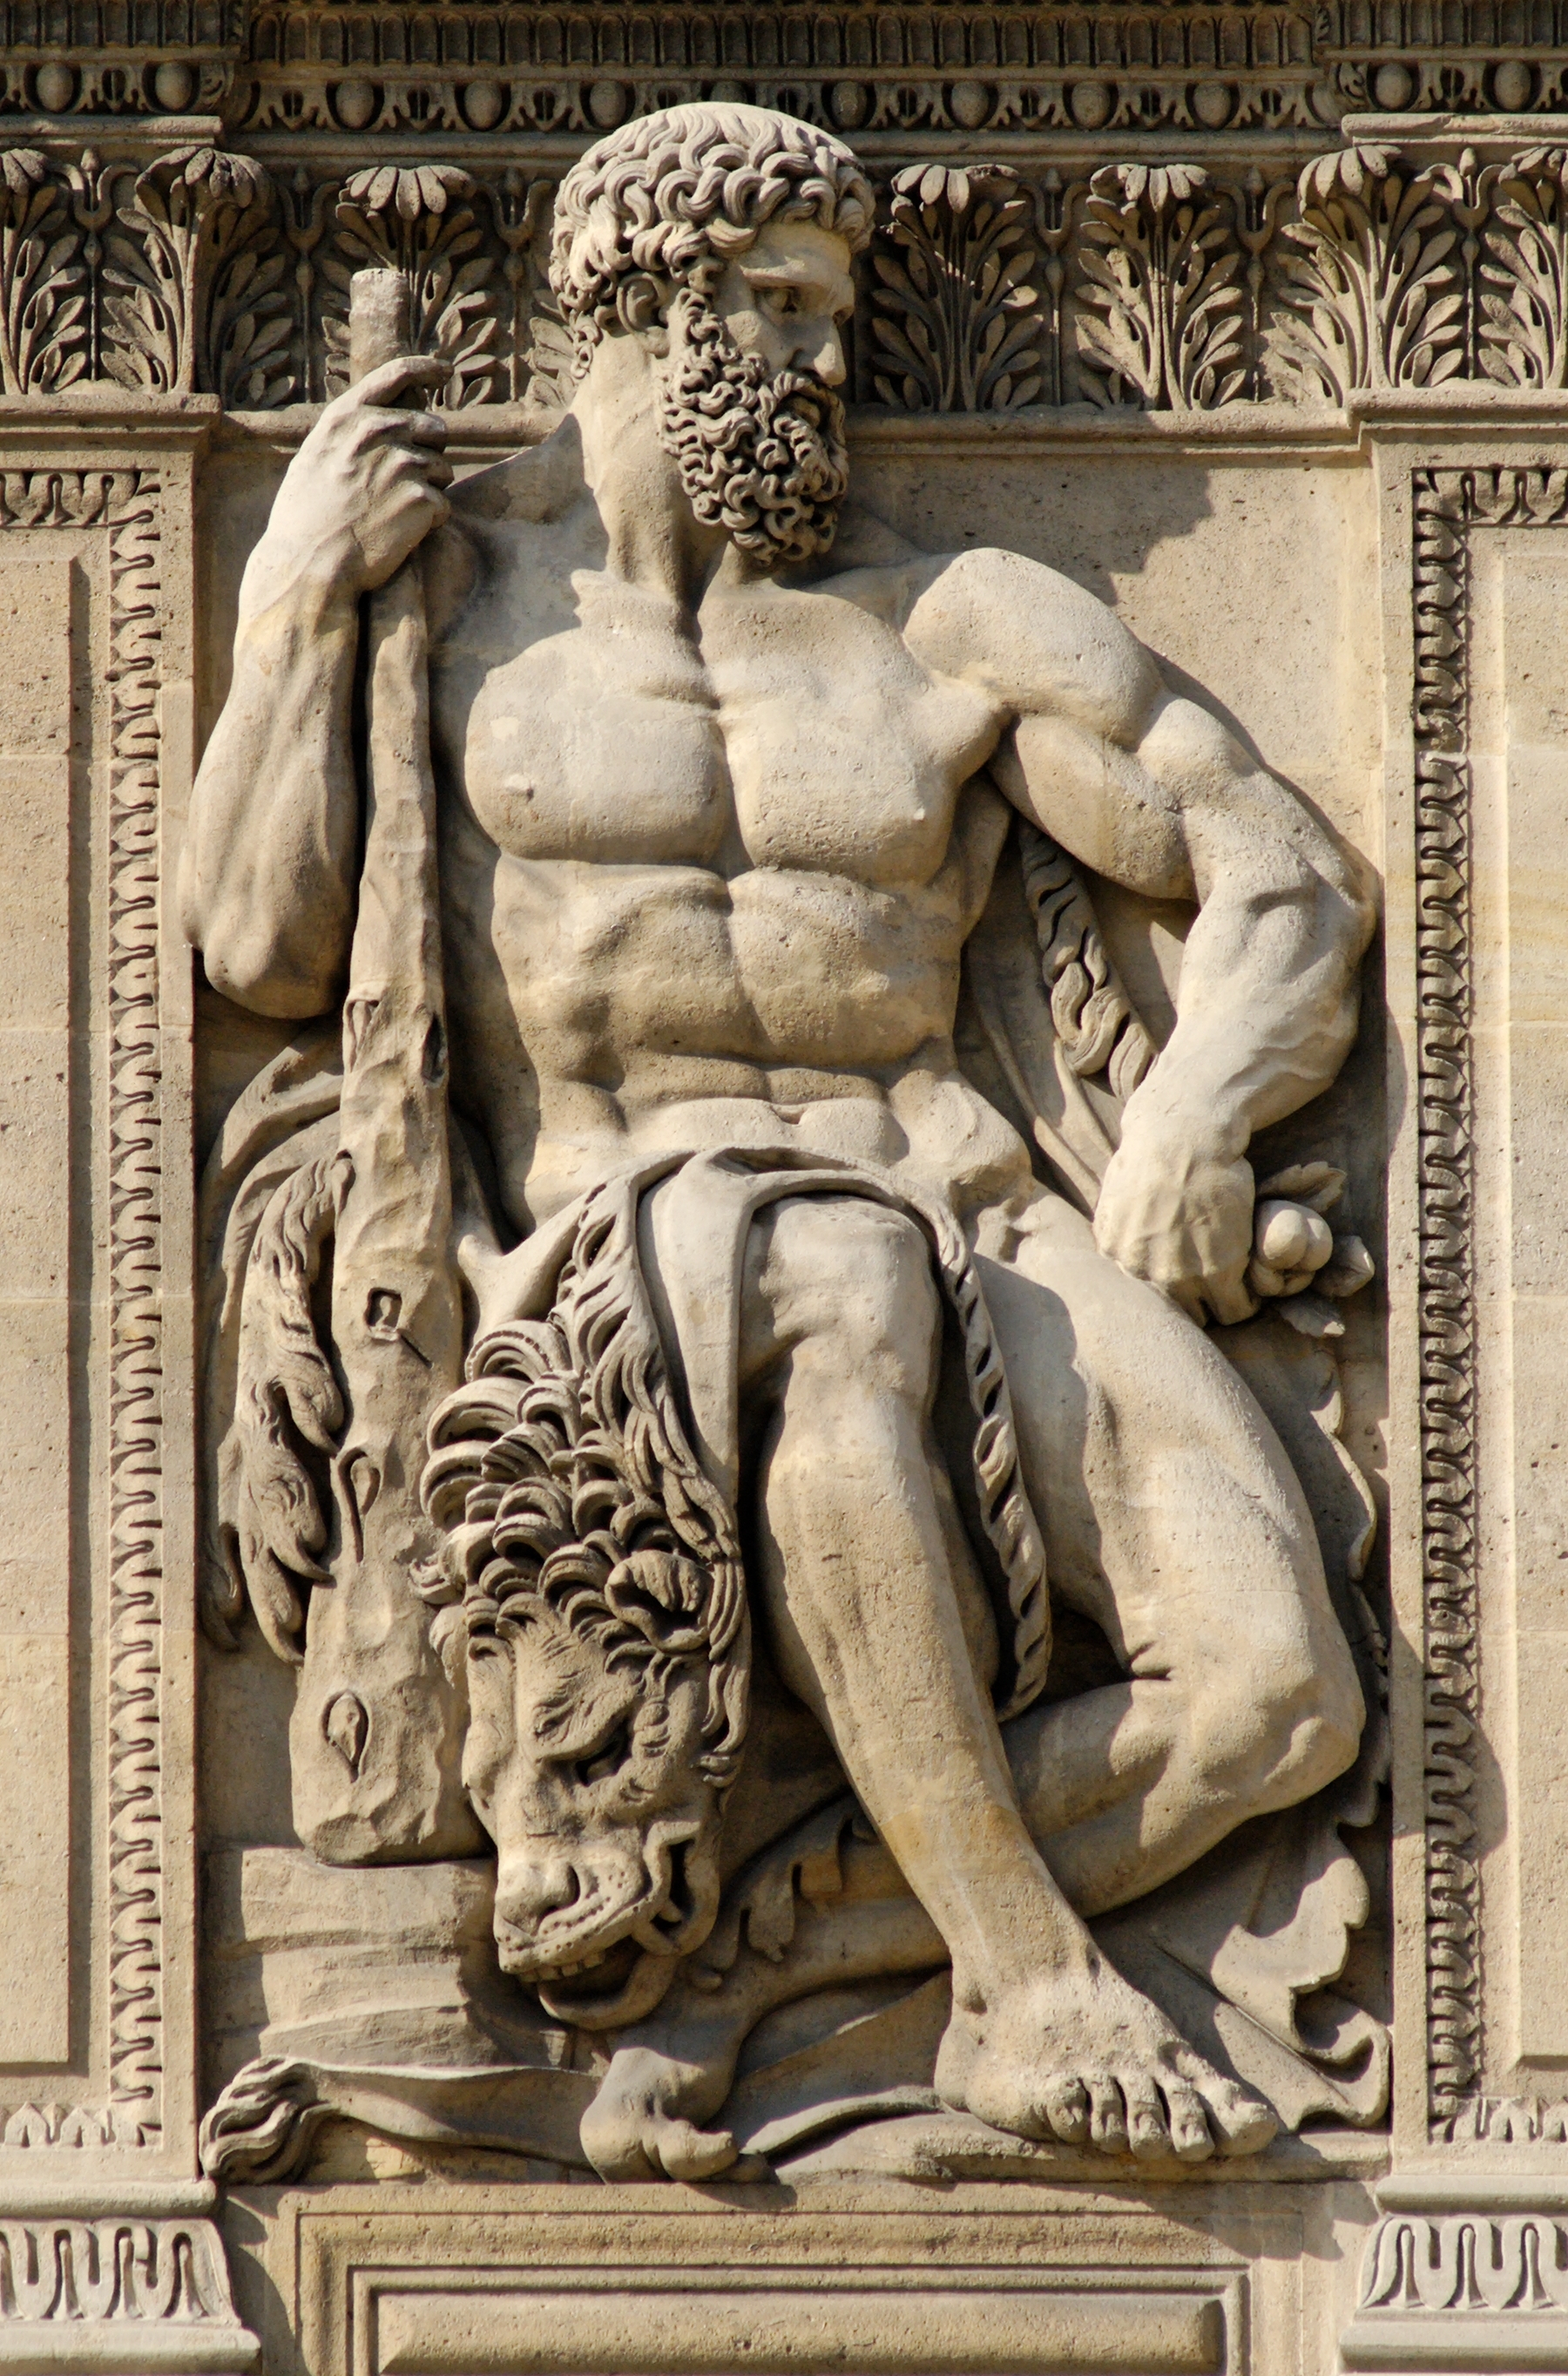 Heracles Heracles Facts And Information On The Greek Hero Heracles